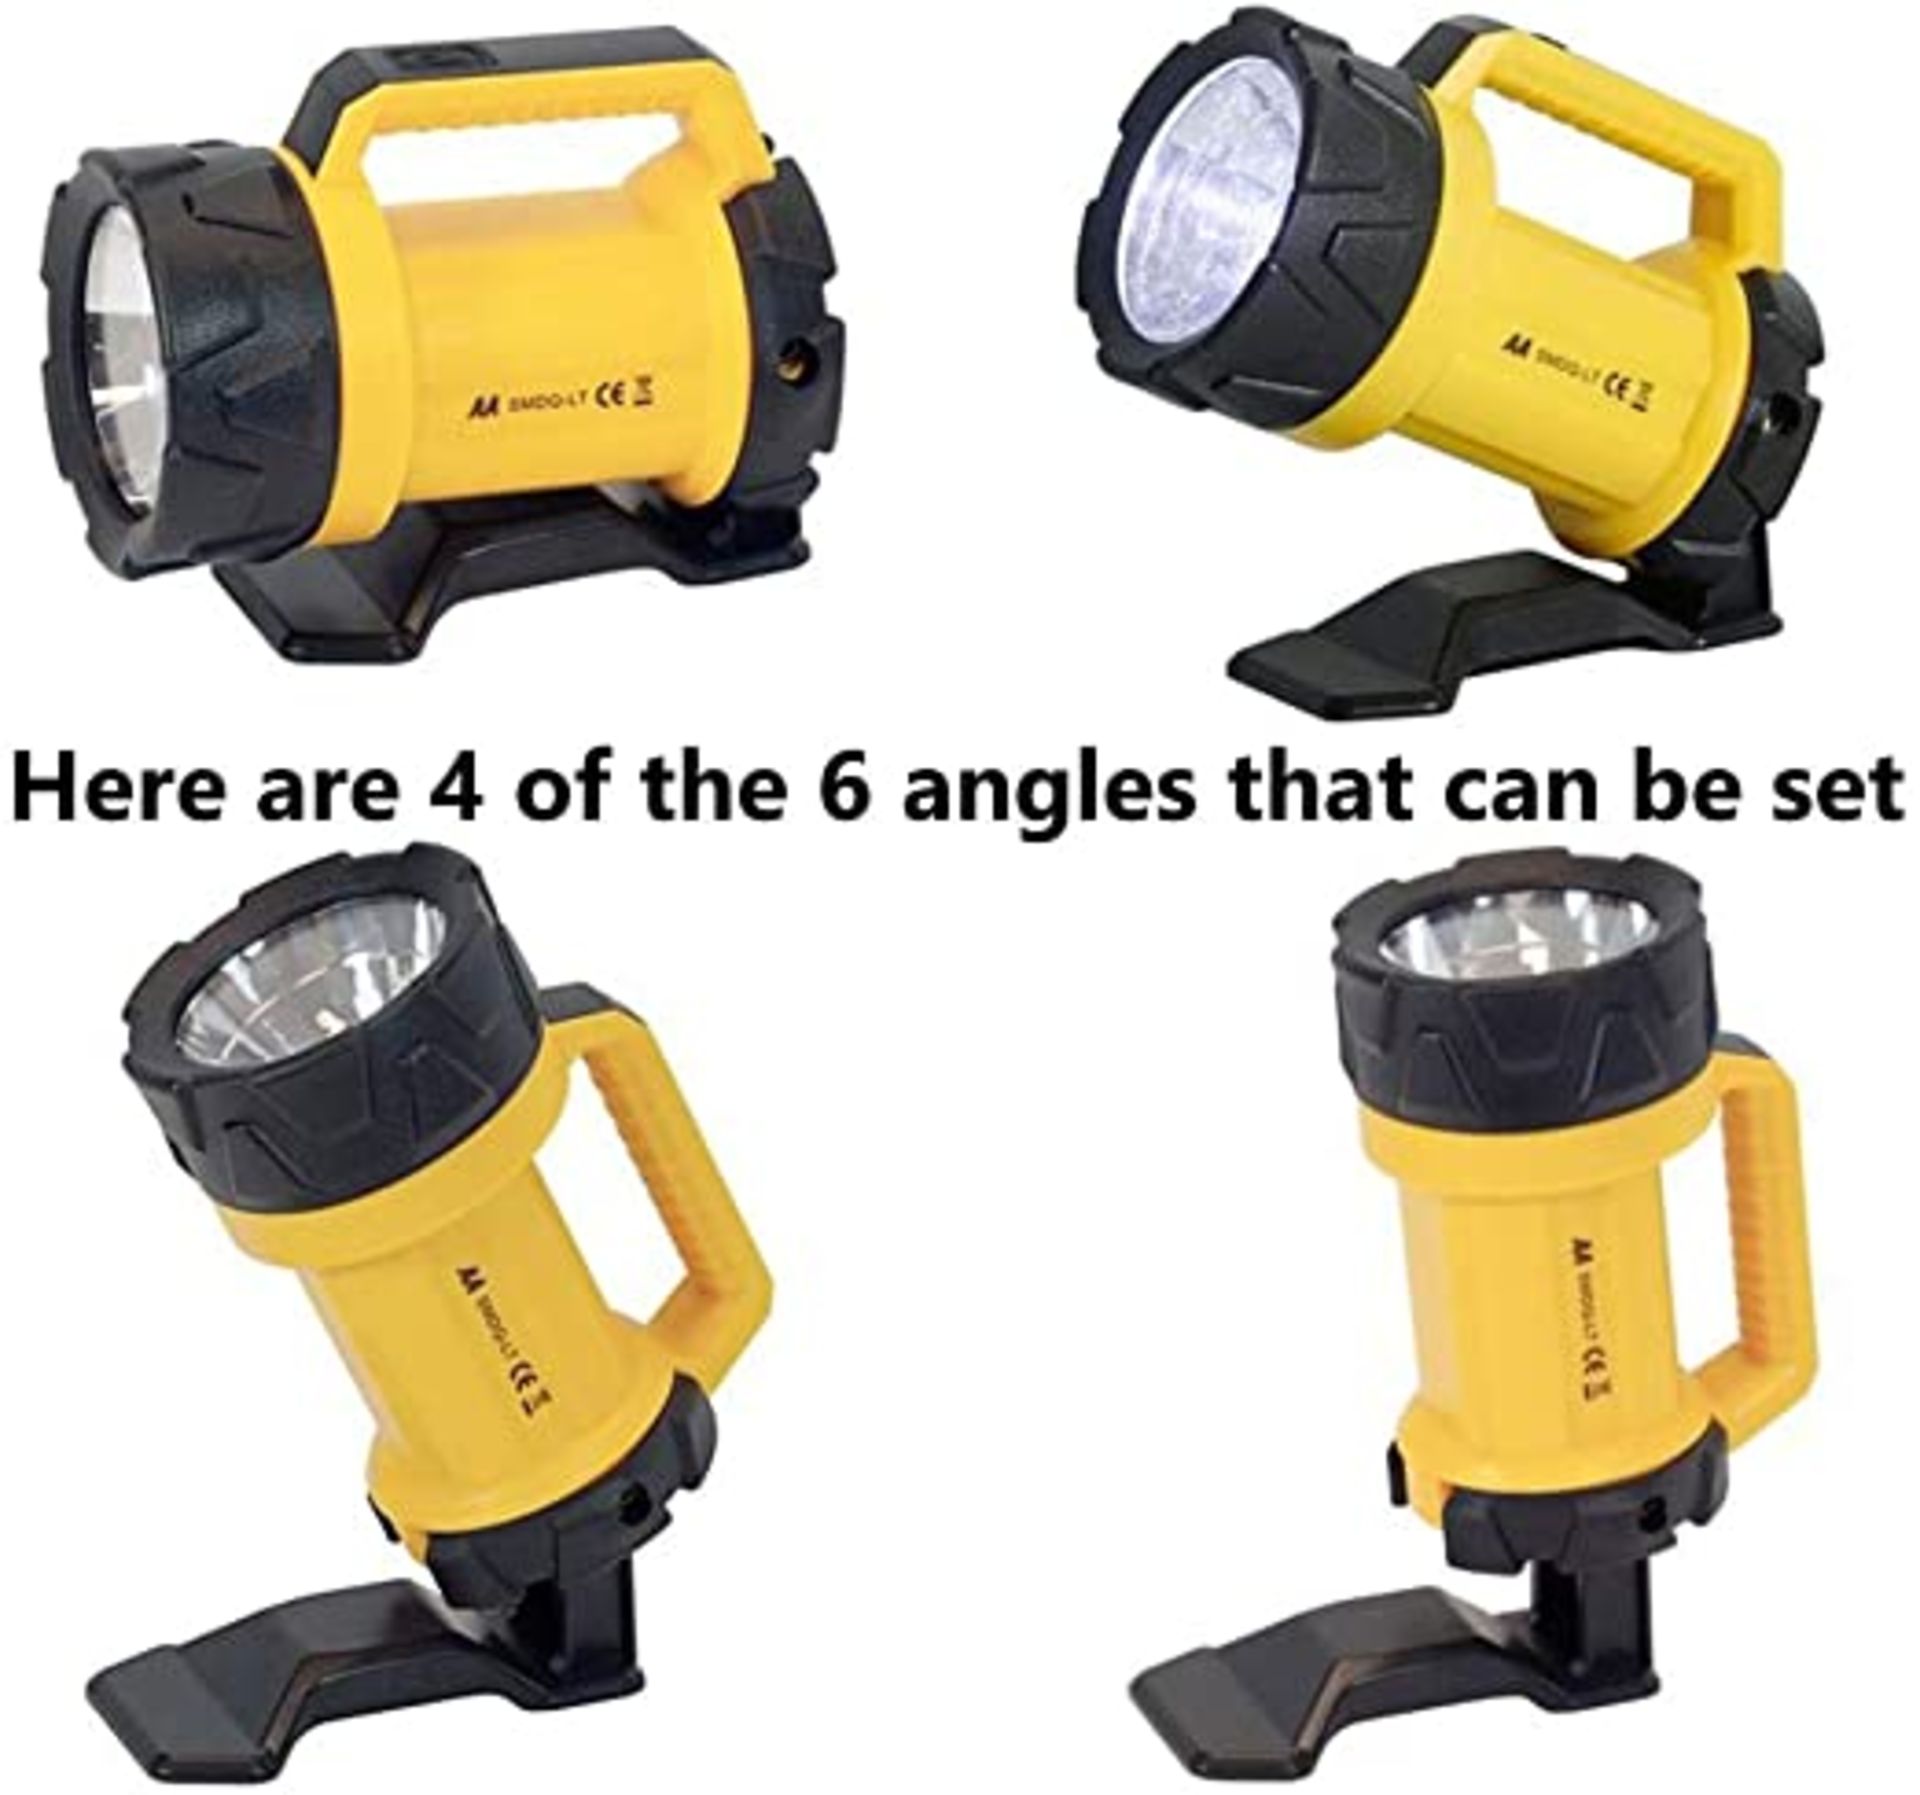 RRP - £17.95 AA Heavy Duty LED Torch AA3881 180 m Beam Distance, Adjustable Base 6 Angles, 120 Lume - Image 2 of 2